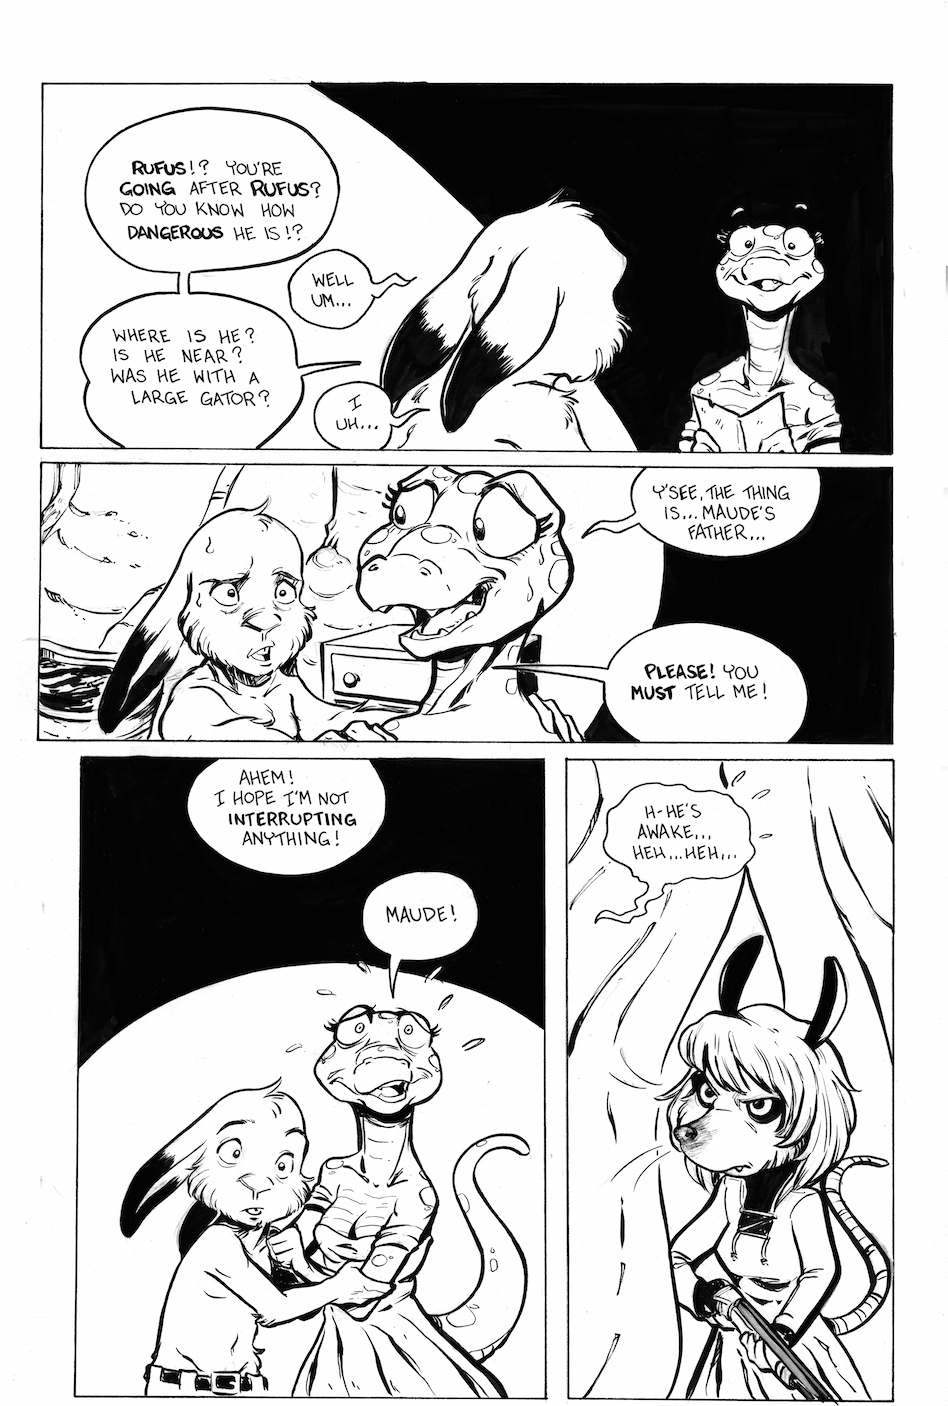 Chapter 02 – Pg. 26